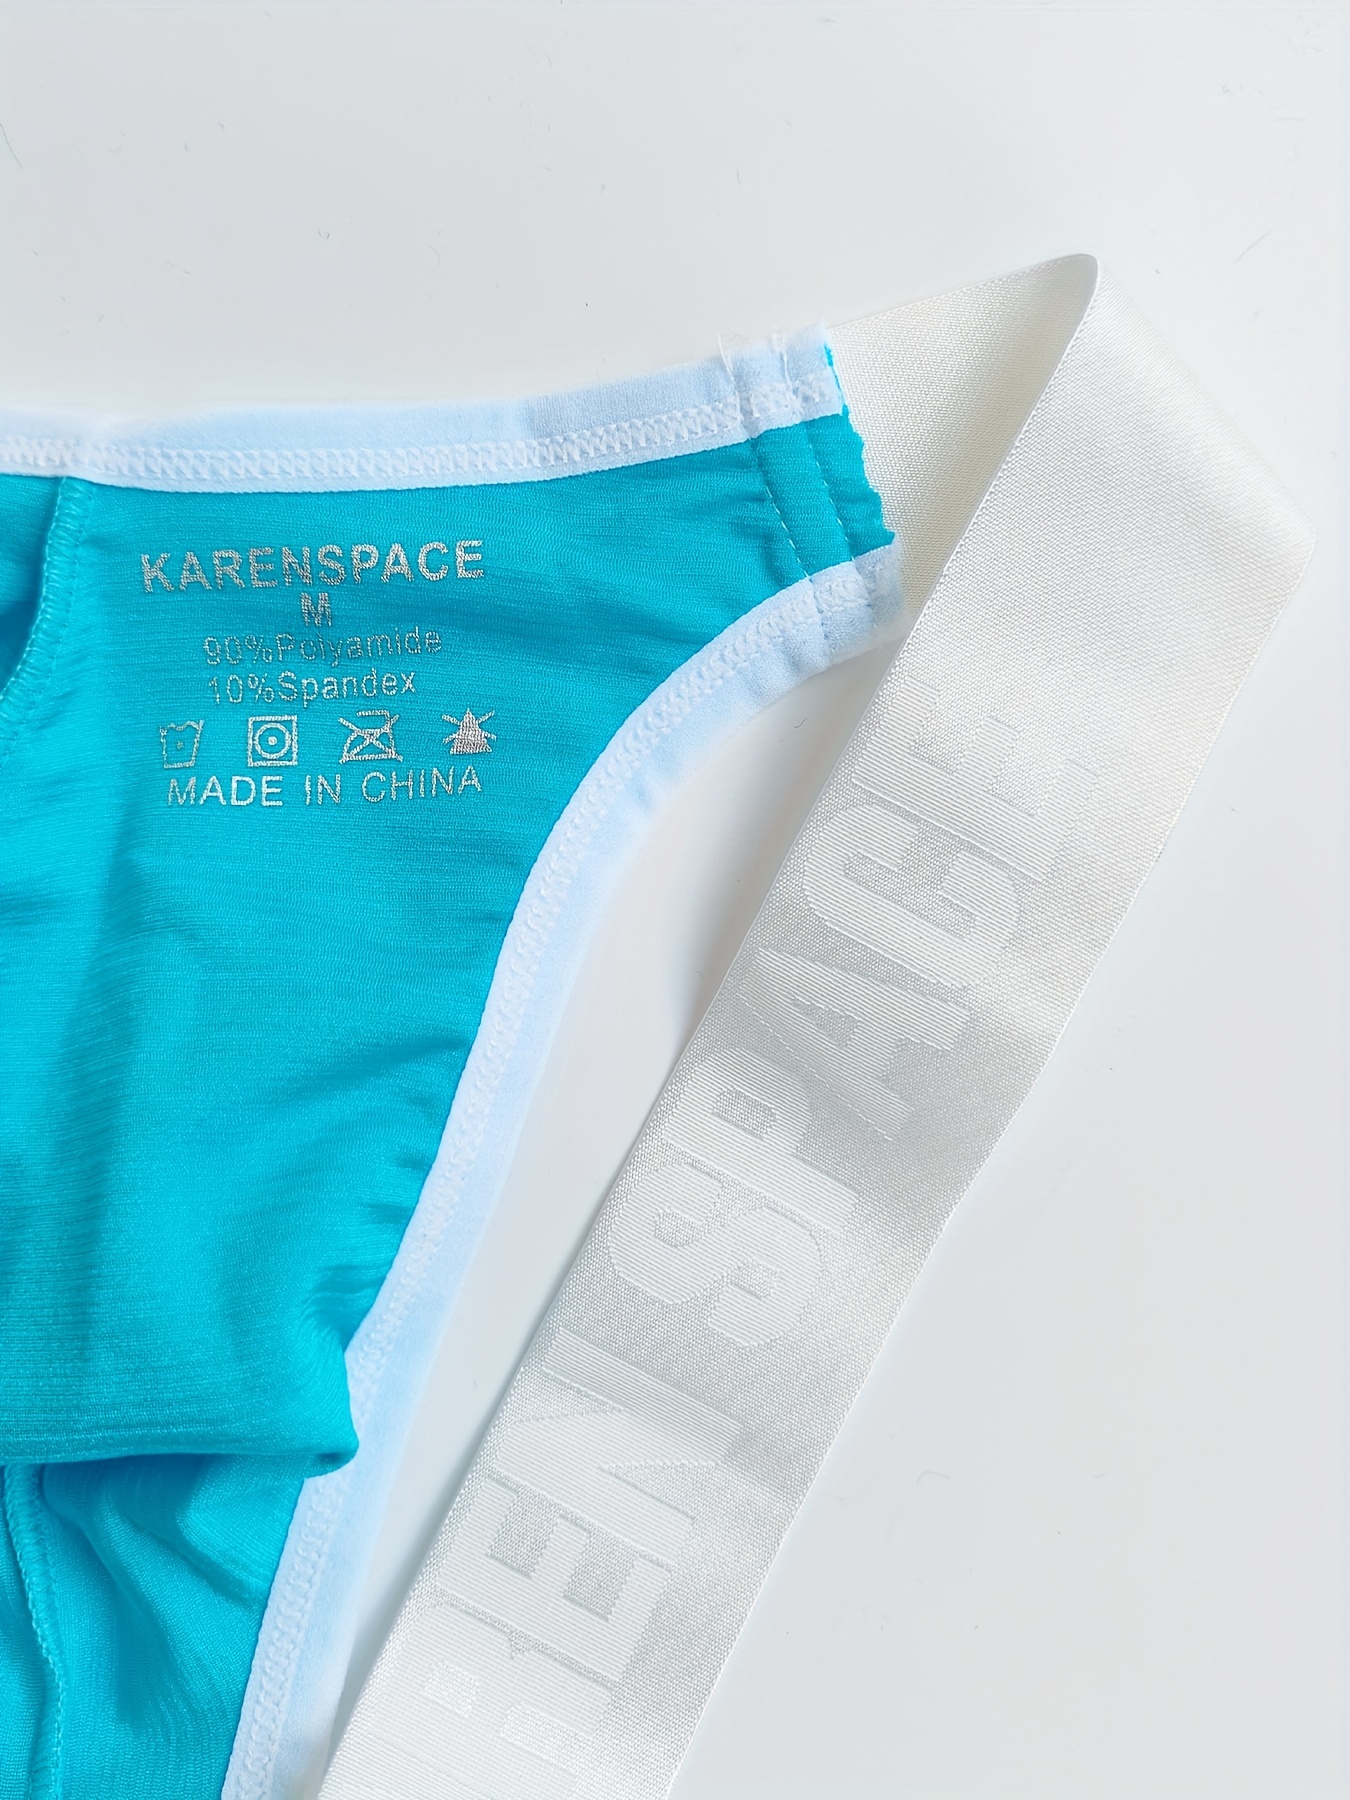 Amore Panty in Teal, Sexy Teal Hipster, Hipster Panties, Gift for